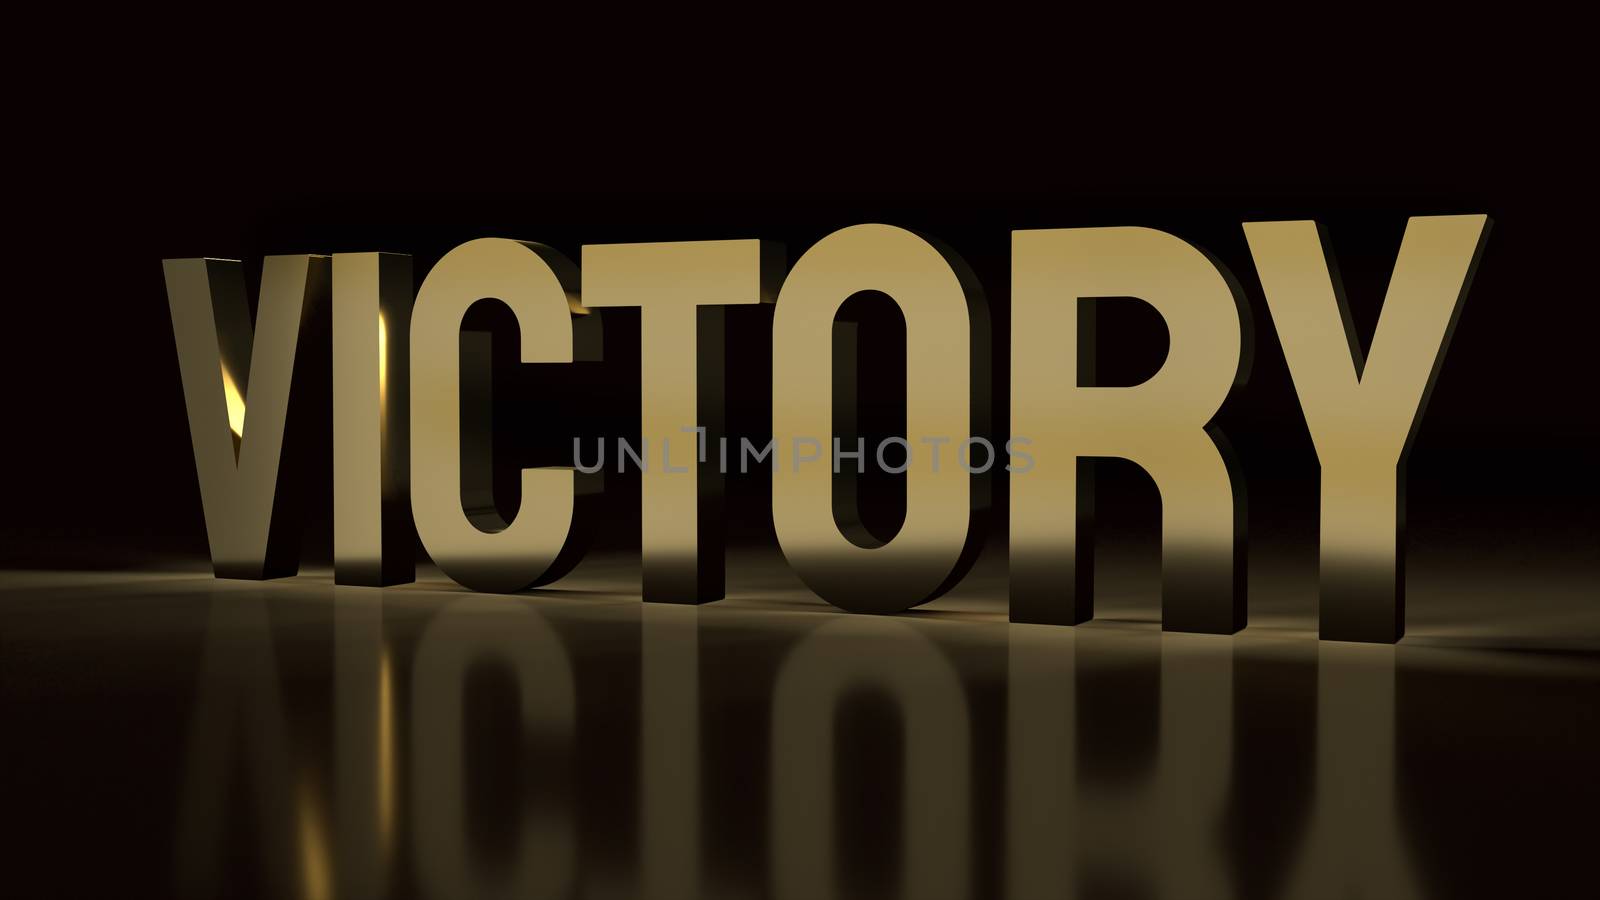 victory text gold surface in black background 3d rendering.